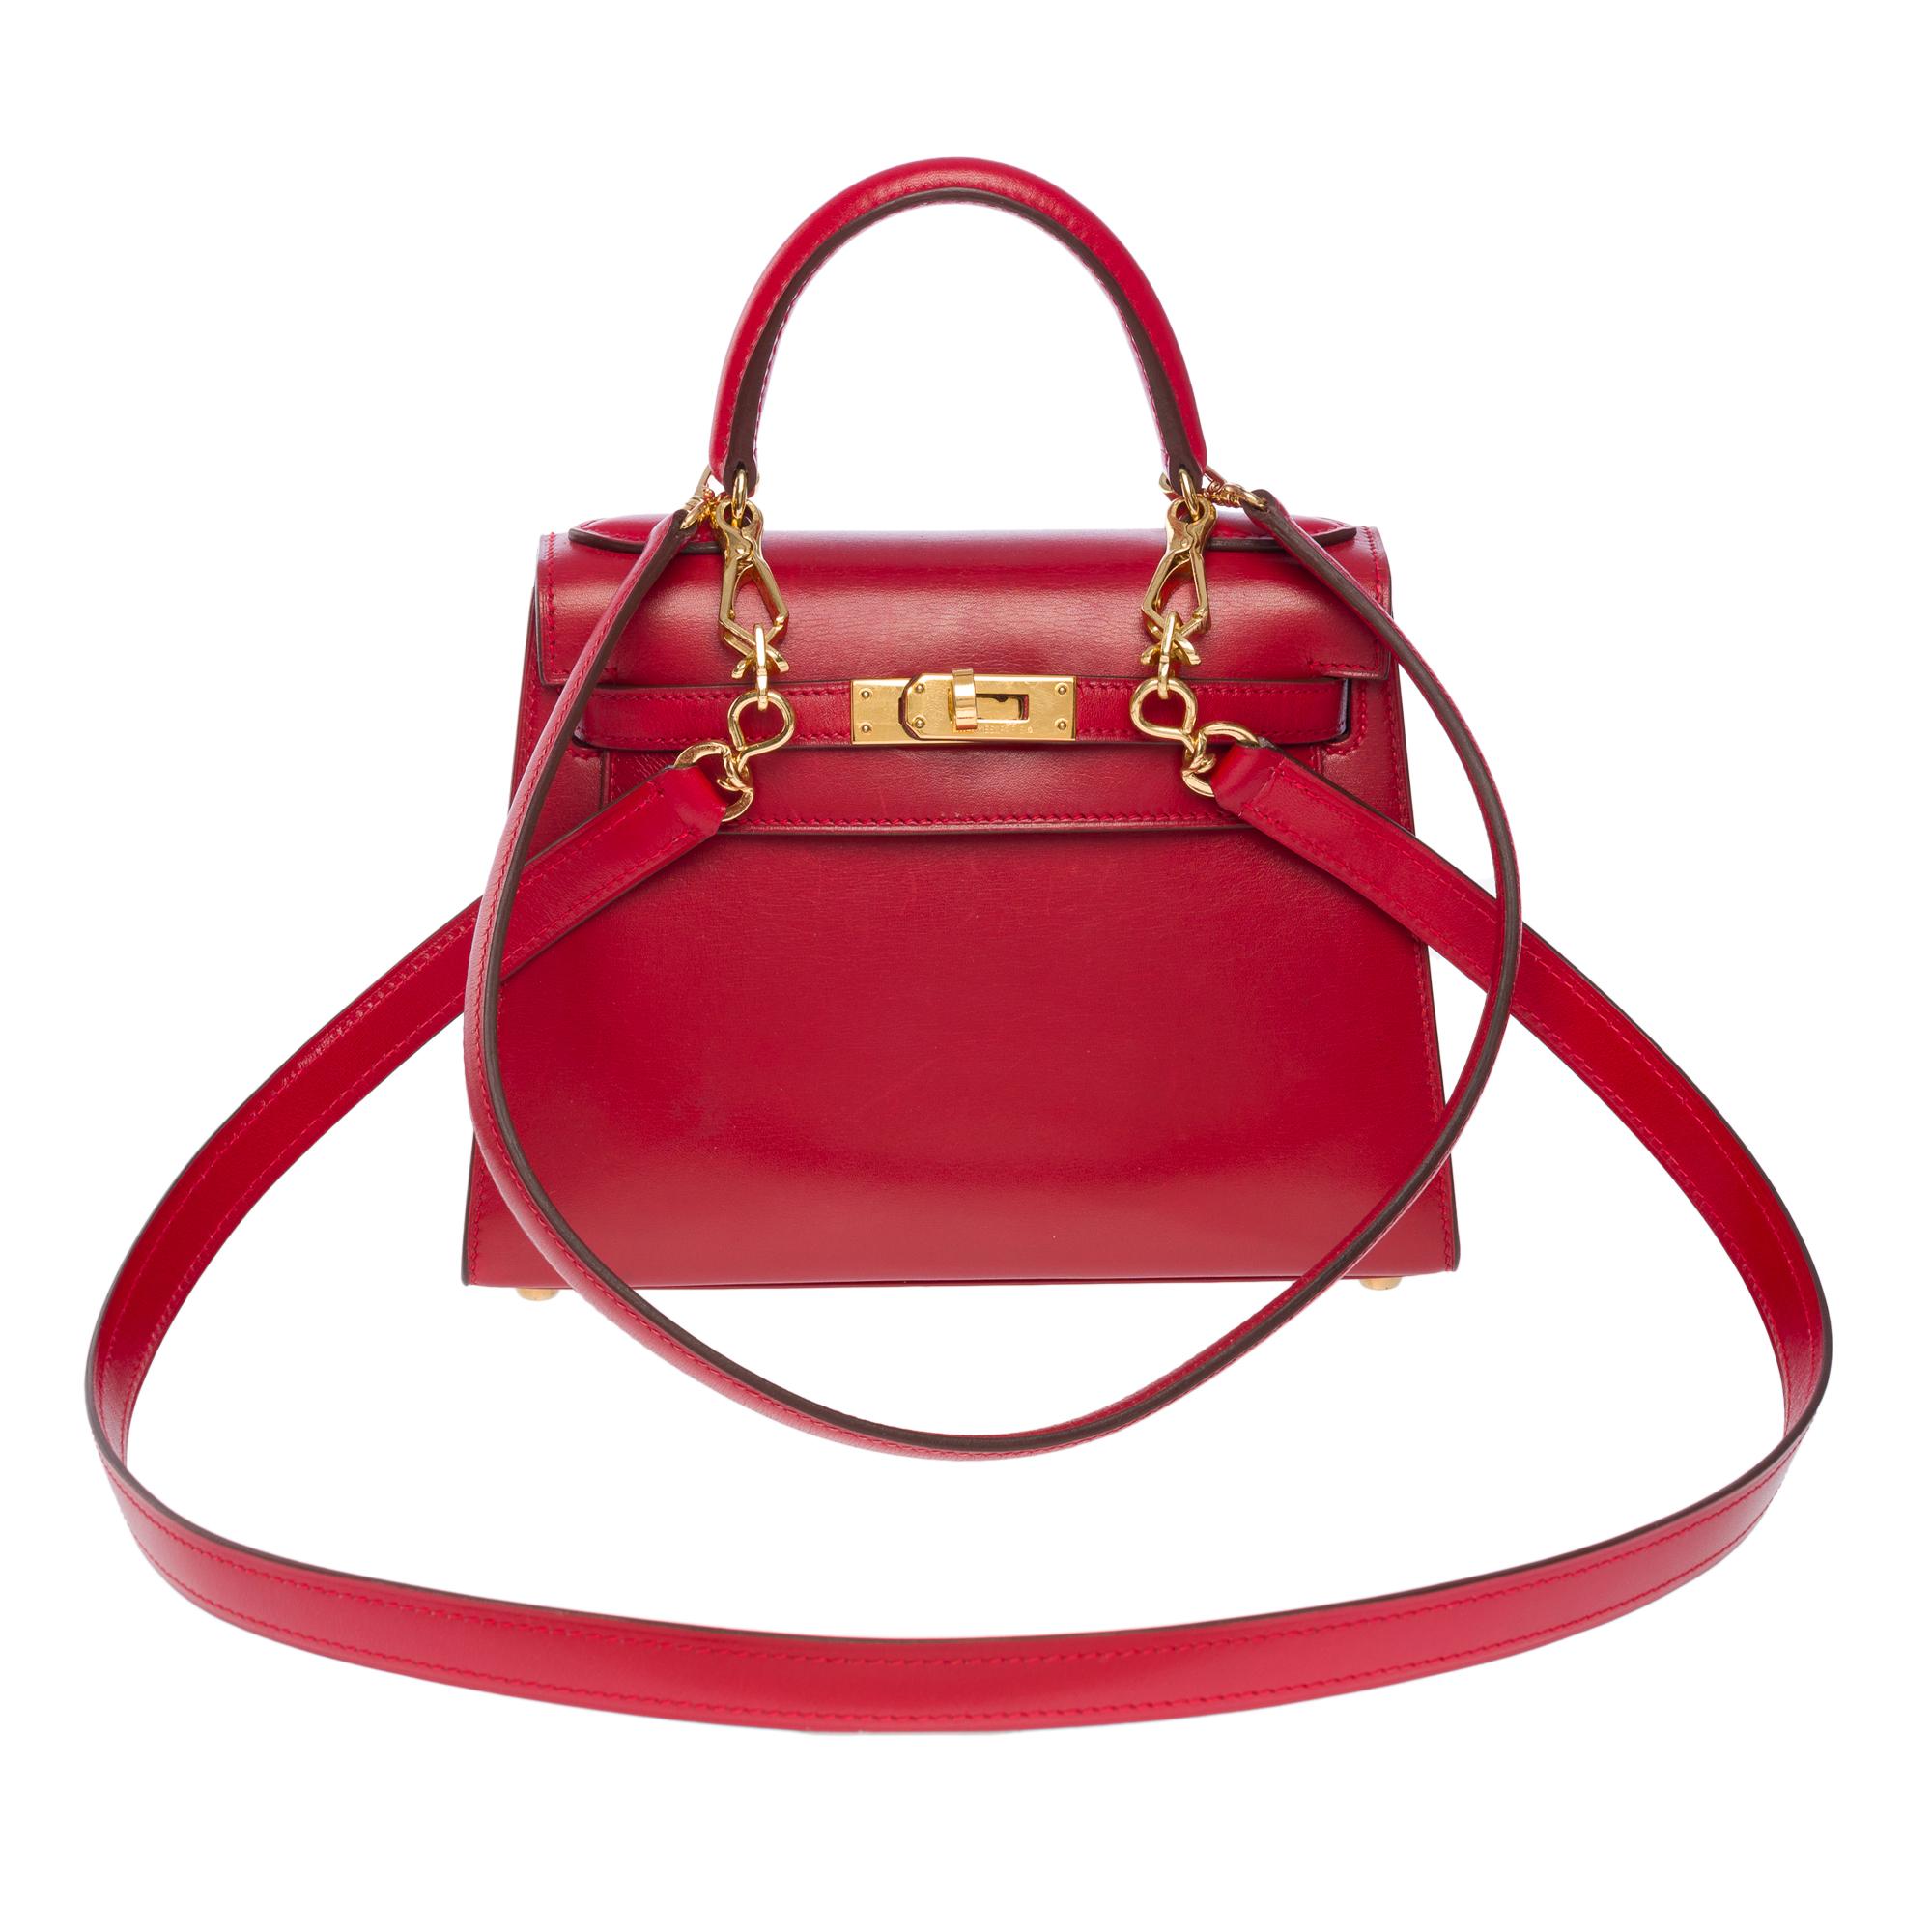 Rare & Amazing Hermes Mini Kelly handbag 20 cm double strap in Red H (burgundy) box calf leather, gold plated metal hardware, handle and 2 removable shoulder straps (one short and one long, not signed Hermès) in red h leather box for a hand,